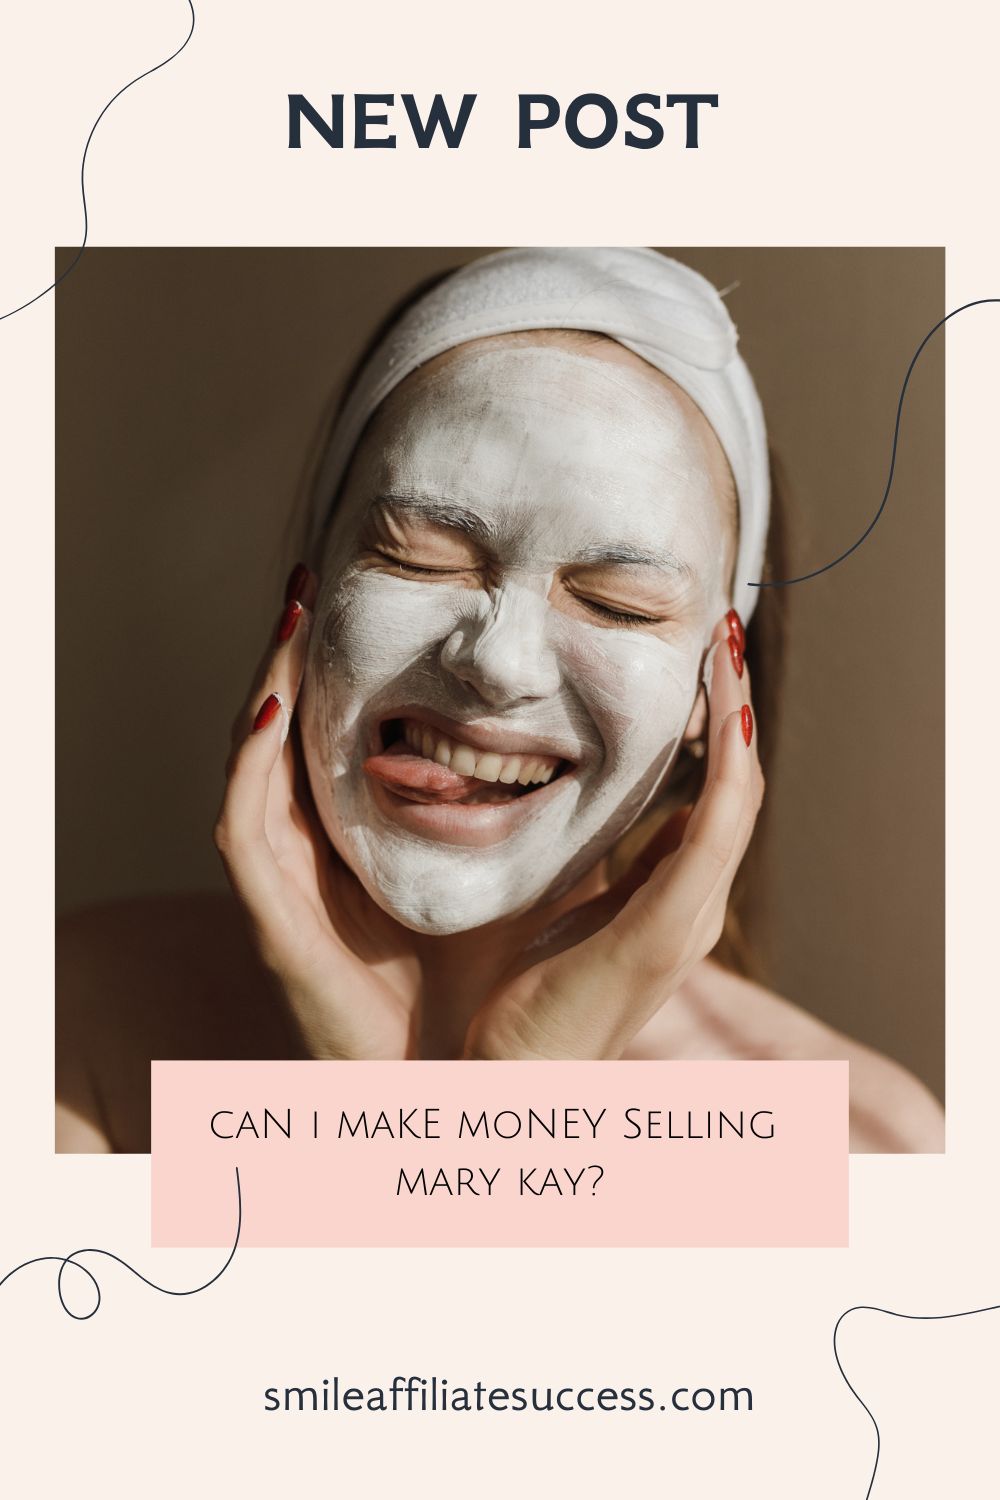 Should I Become A Mary Kay Consultant?